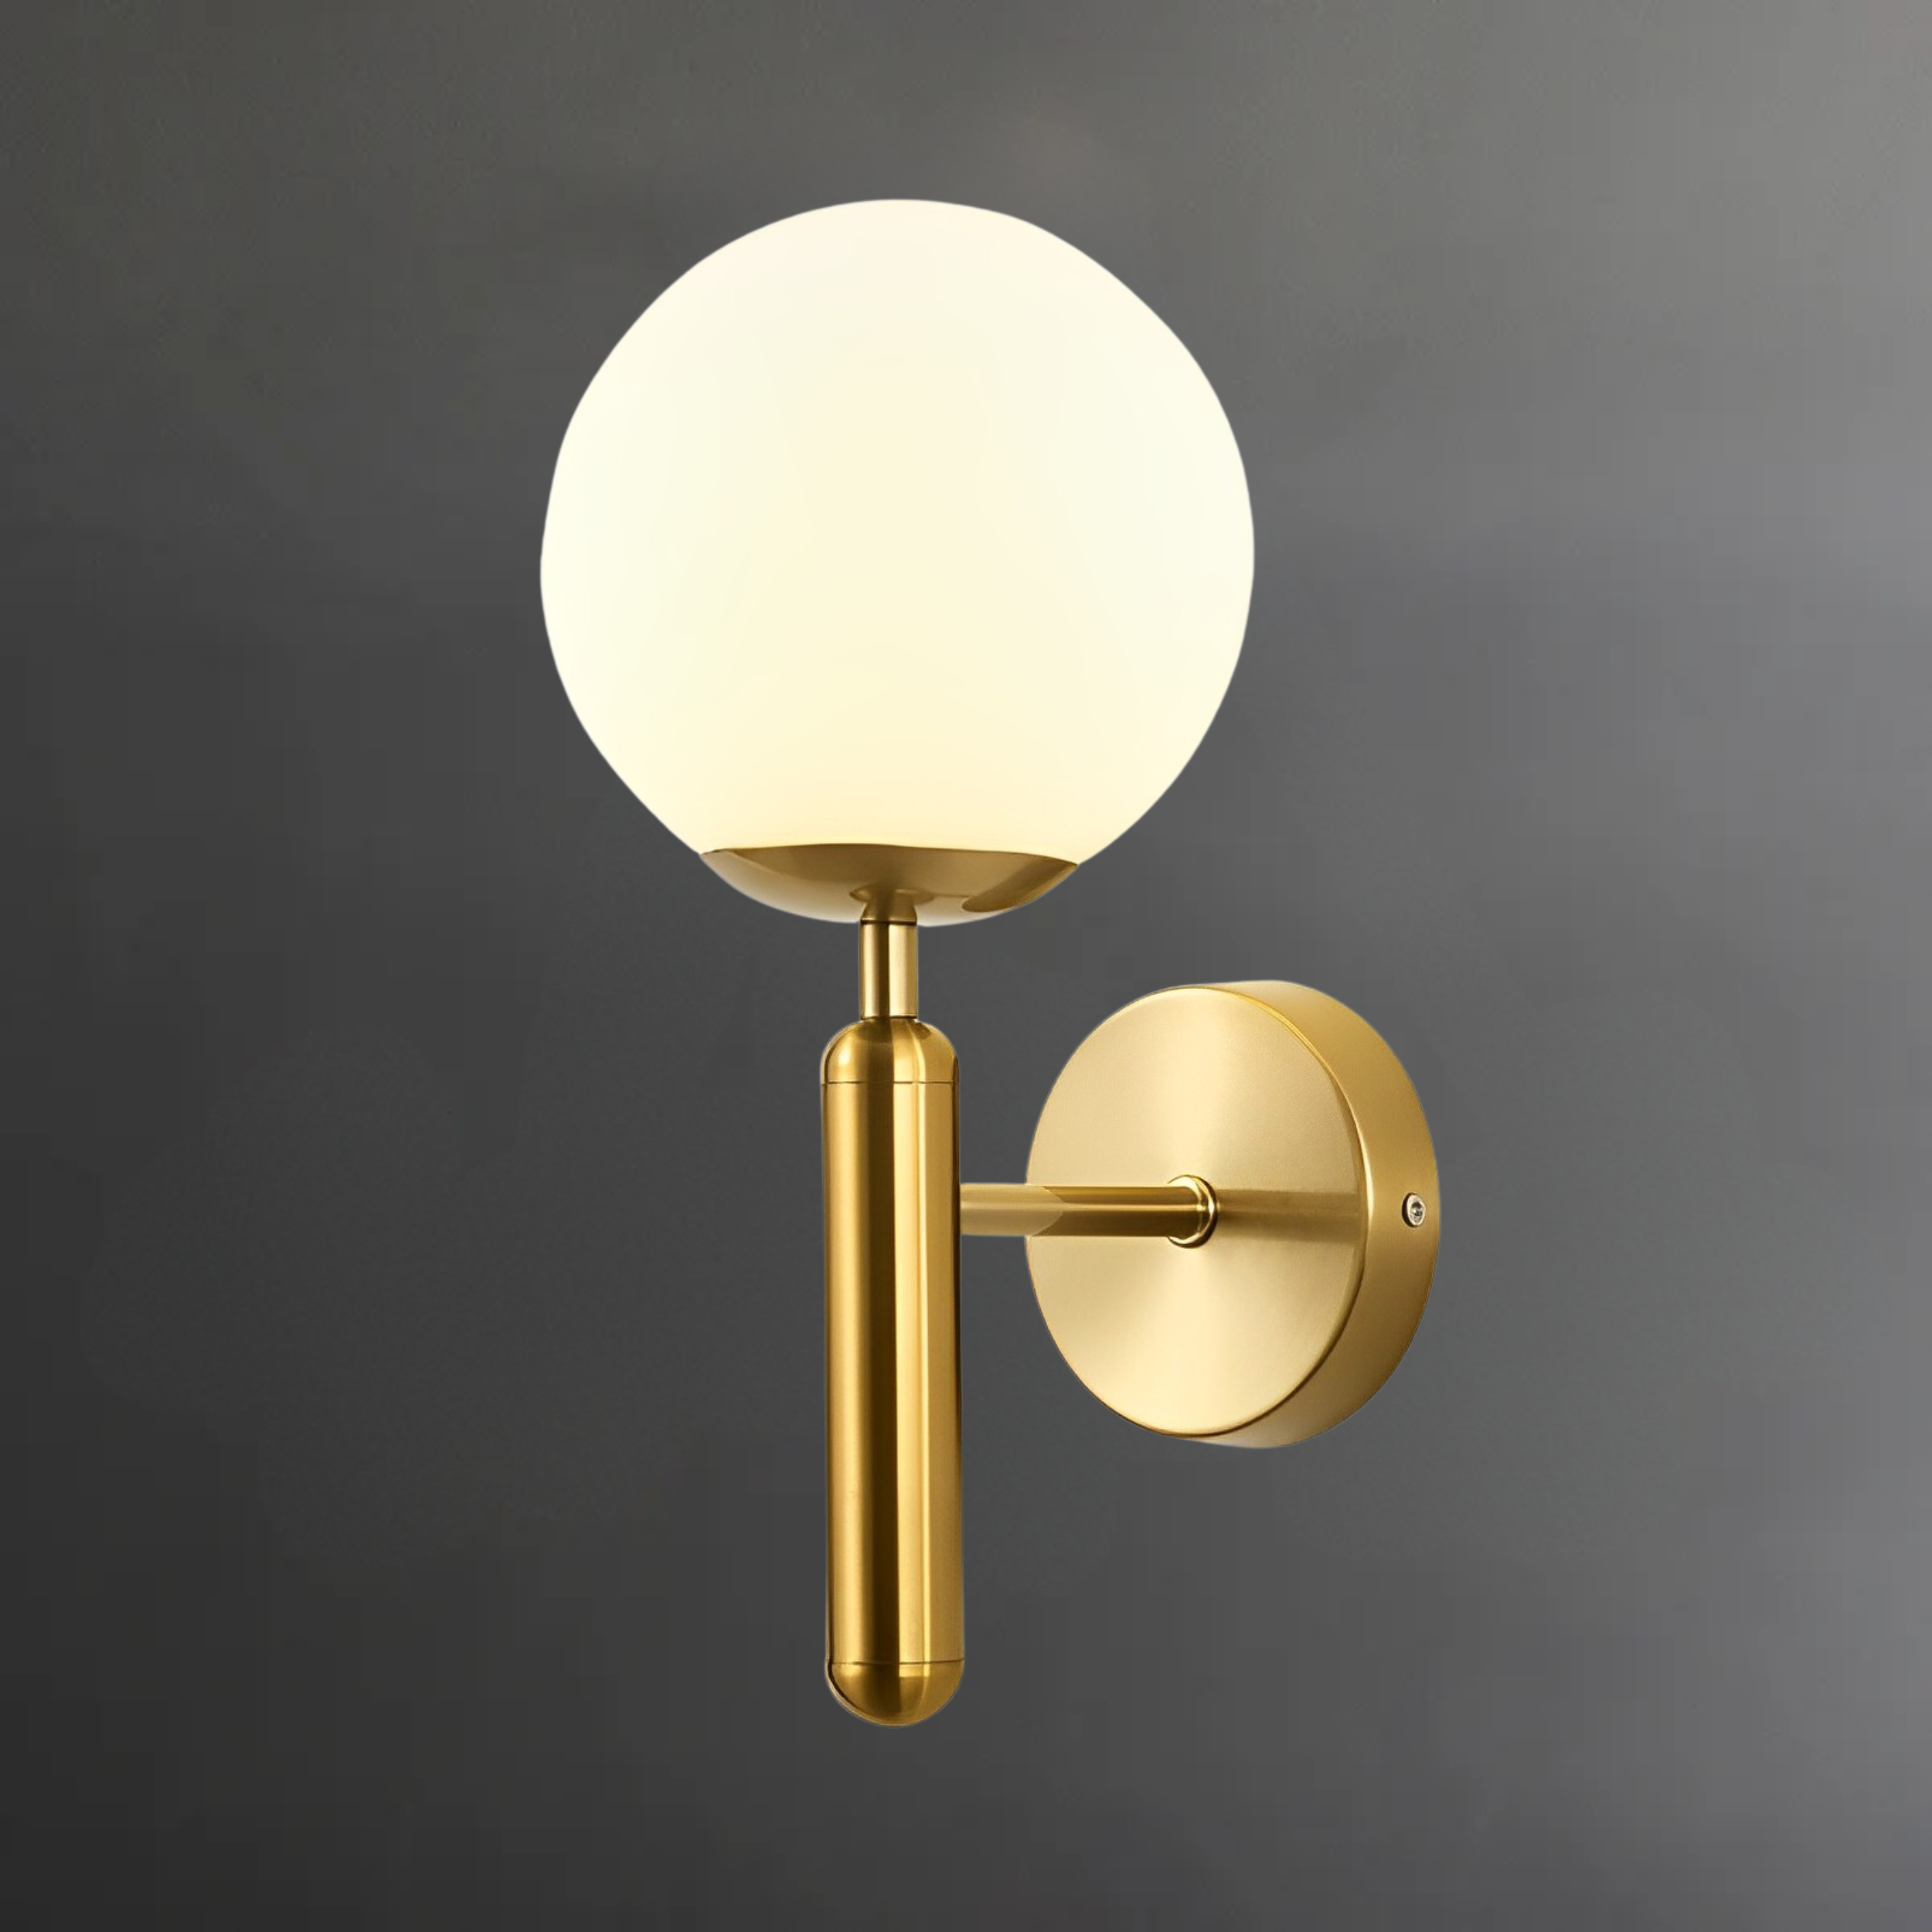 WL-B0032 Modern White glass ball wall lights Creative Metal Glass Wall Lamps for bedroom, stair, Corridor, Hallway bedside wall mounted lamp (Single Piece)